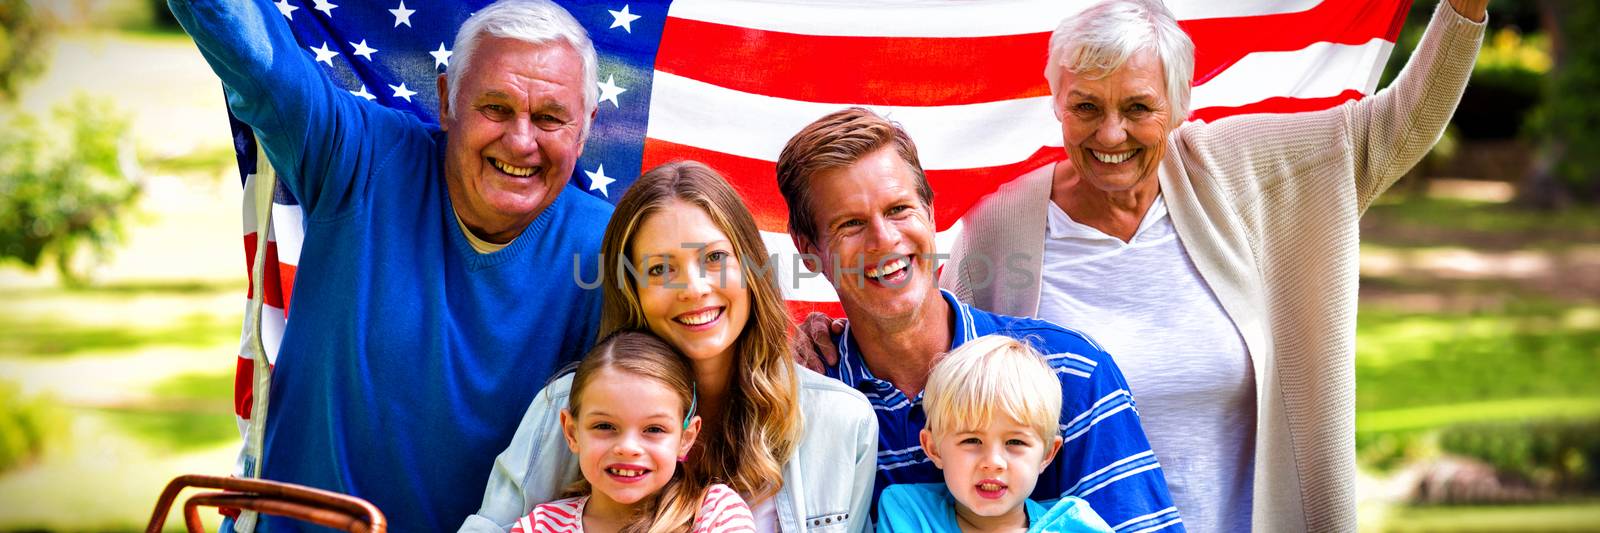 Multi-generation family holding american flag in the park by Wavebreakmedia